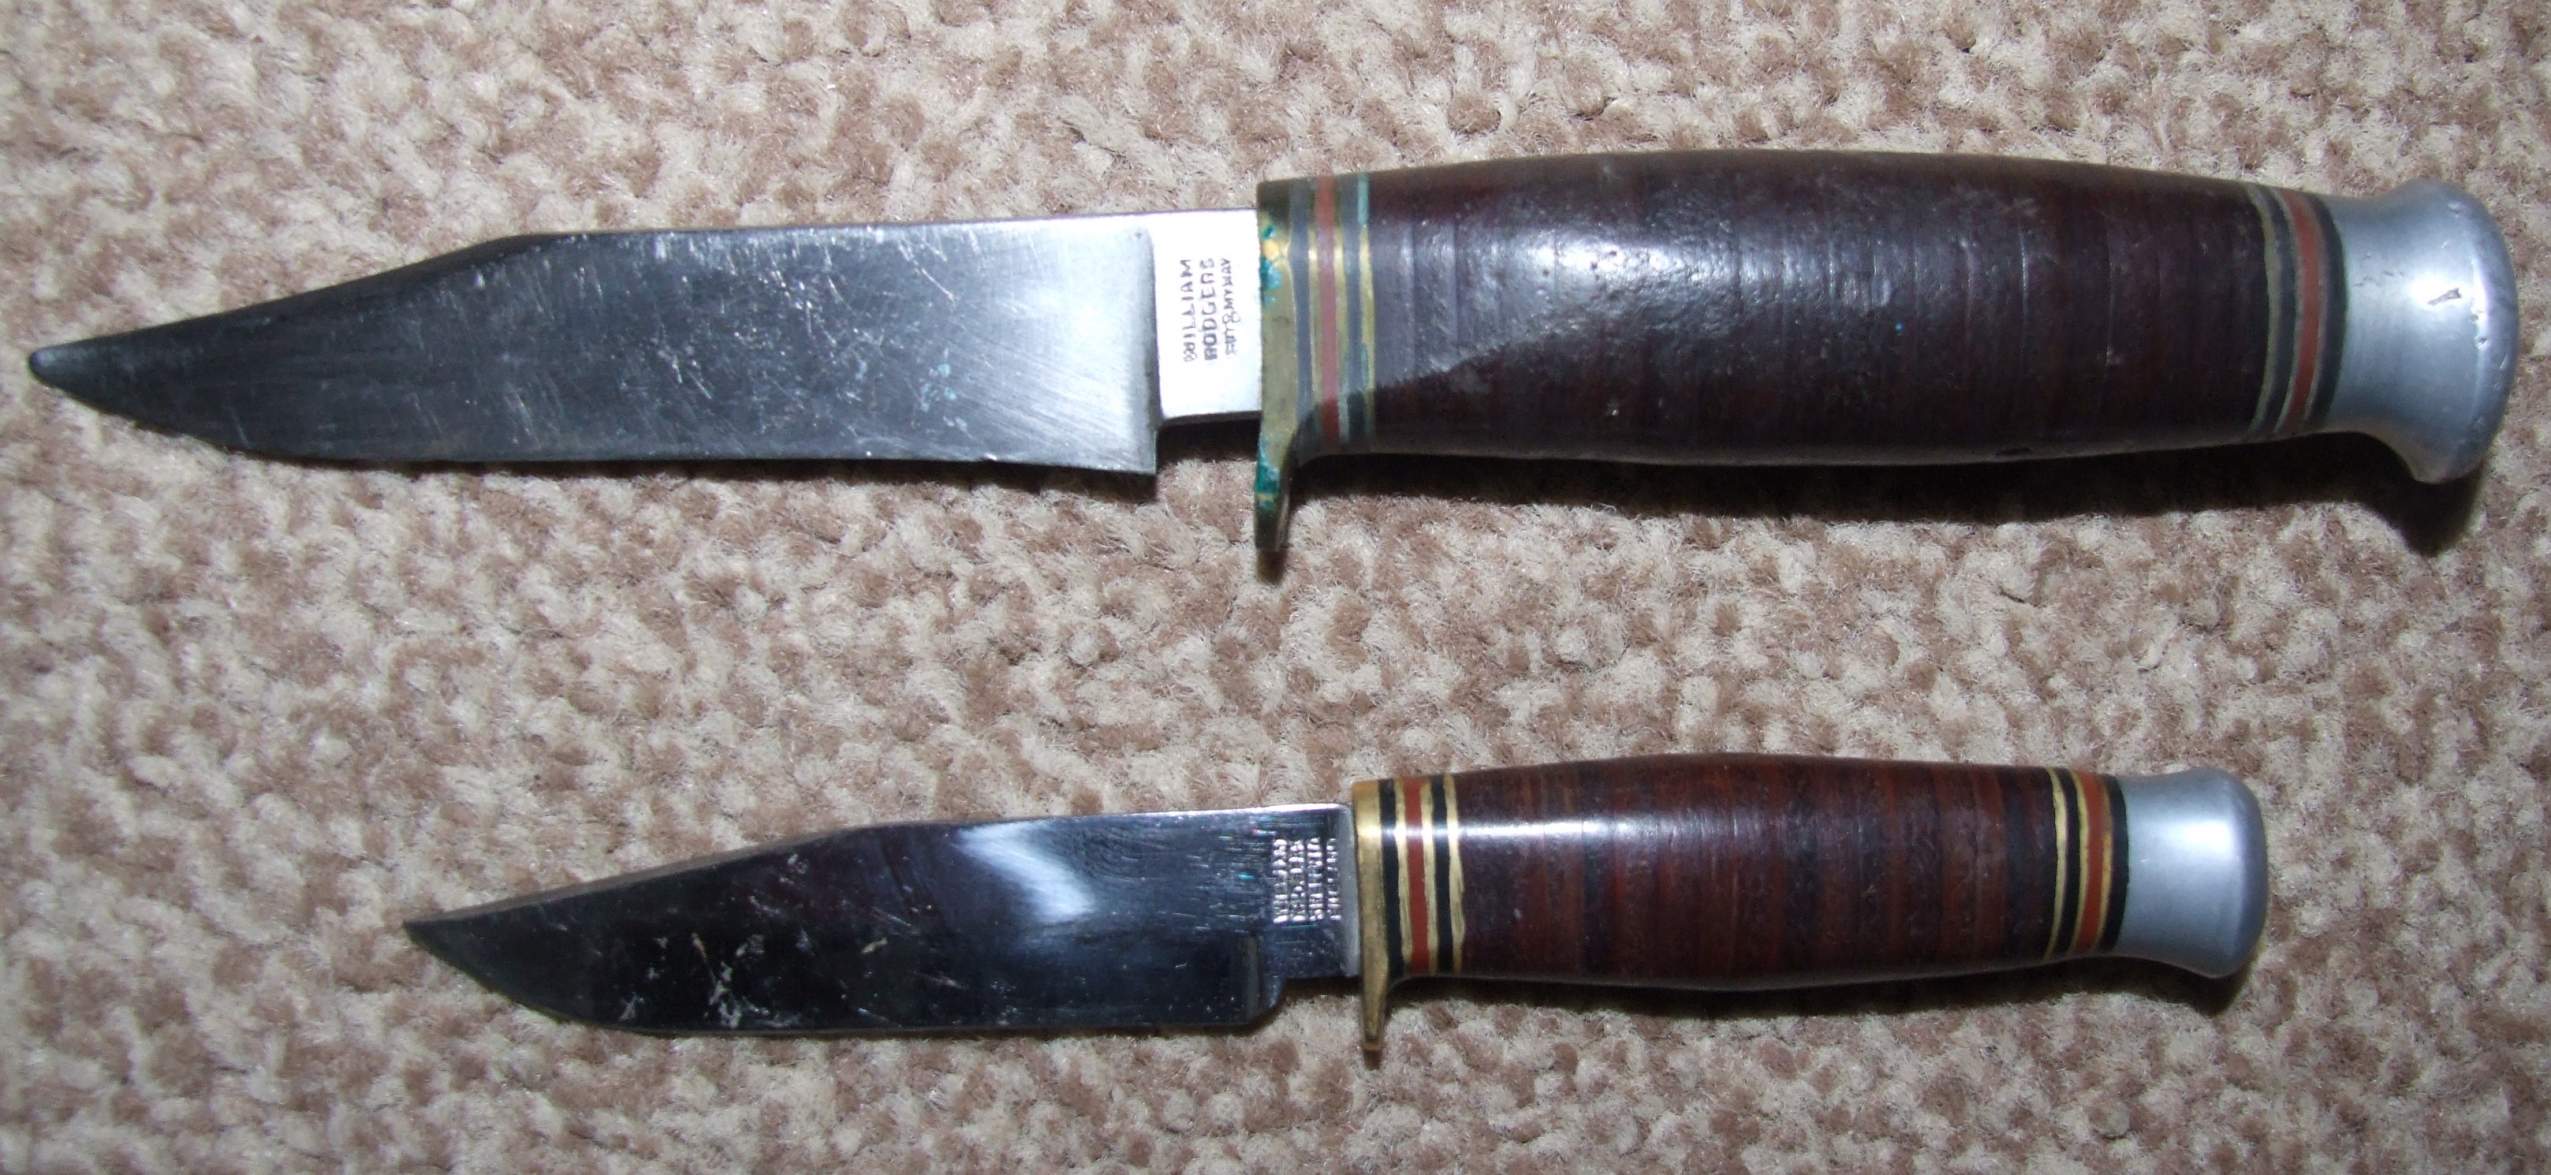 Rodgers knives william Joseph Rodgers